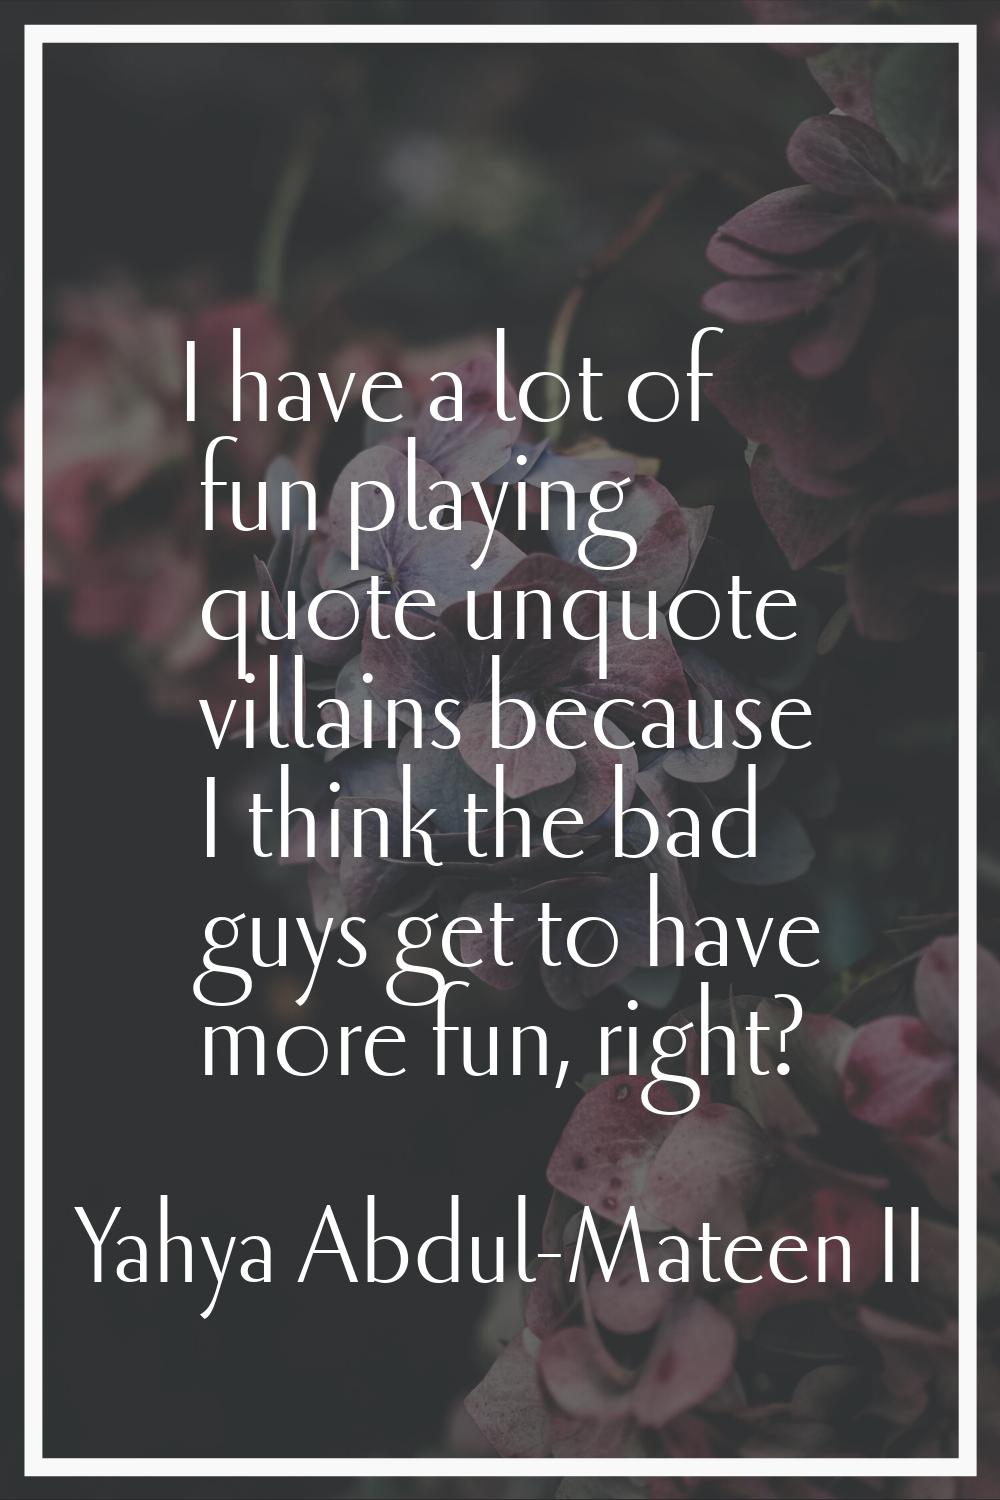 I have a lot of fun playing quote unquote villains because I think the bad guys get to have more fu